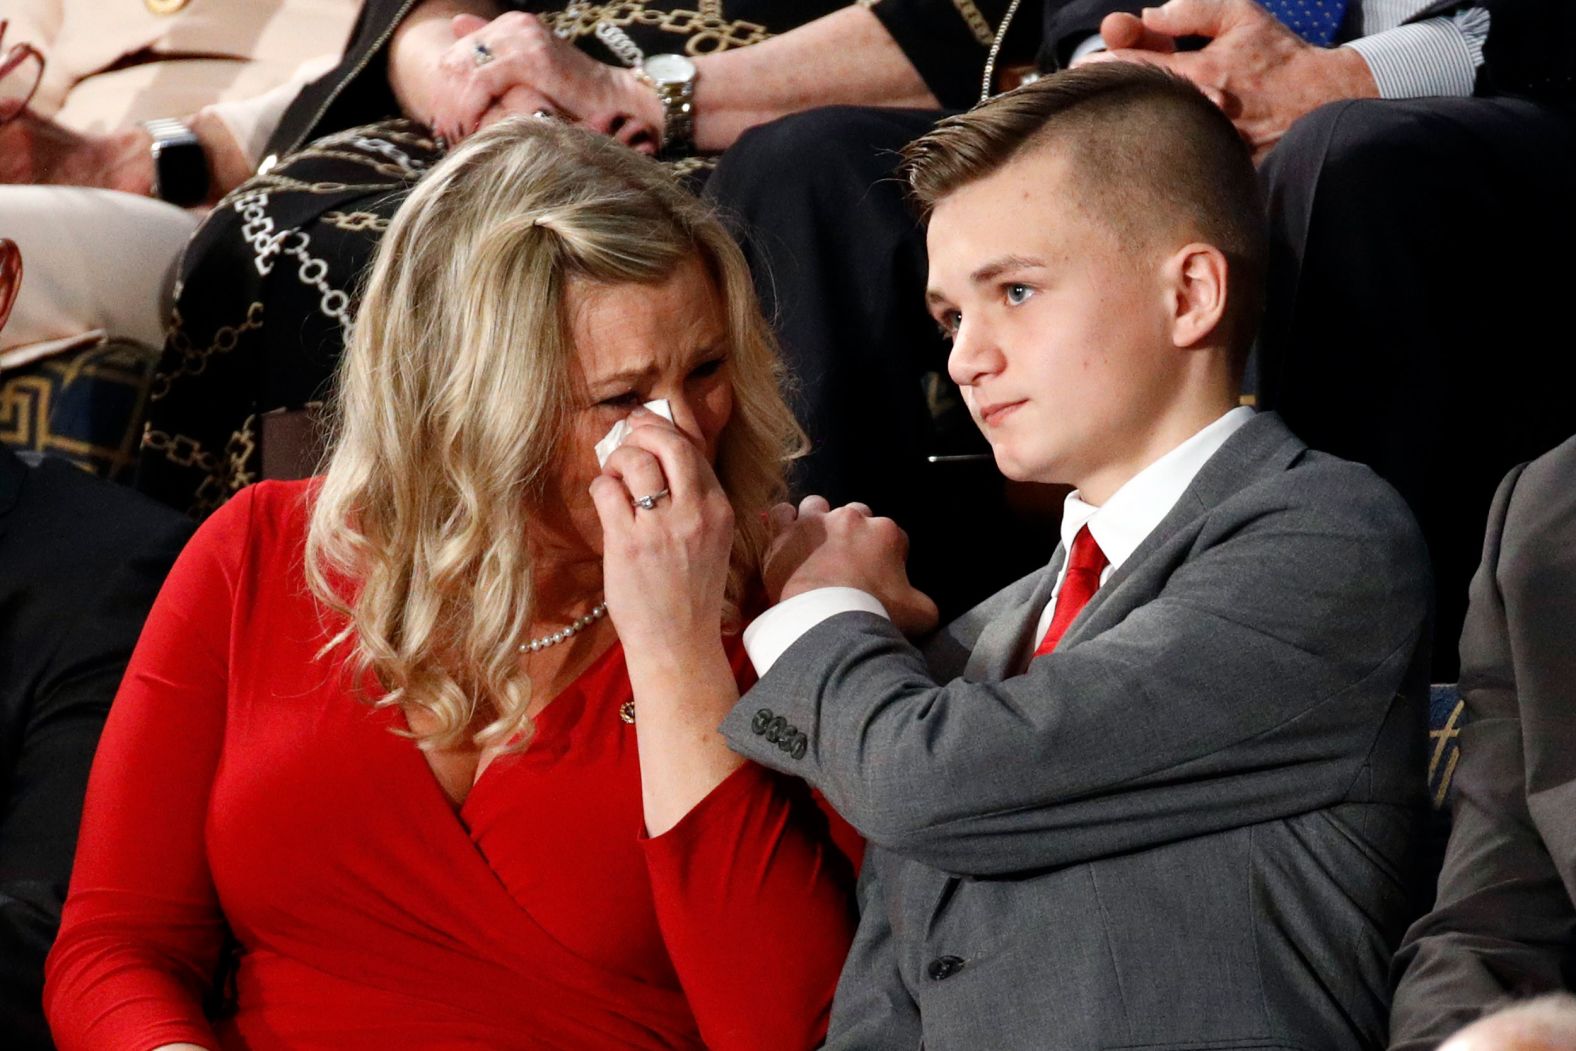 Kelli Hake cries as she and her son, Gage, are recognized by Trump during his speech. Army Staff Sgt. Christopher Hake, Kelli's husband and Gage's dad, was killed in 2008 while serving his second tour of duty in Iraq. The White House said Hake's vehicle was hit by a roadside bomb supplied by Iranian military leader Qasem Soleimani. Earlier this year at Trump's direction, Soleimani was killed in an airstrike.